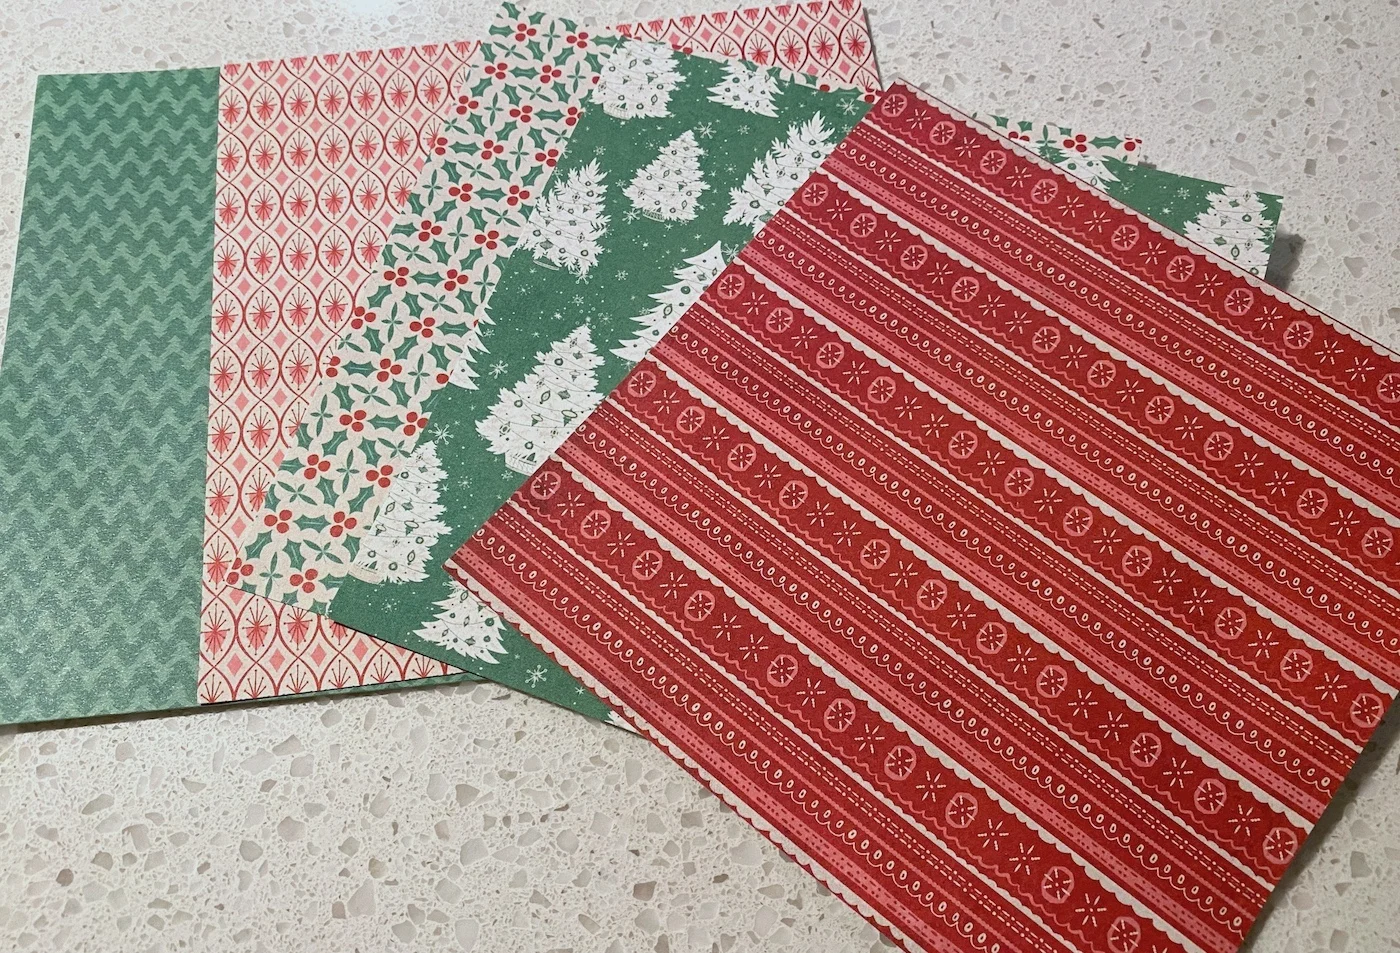 Five sheets of Christmas scrapbook paper spread out on a counter